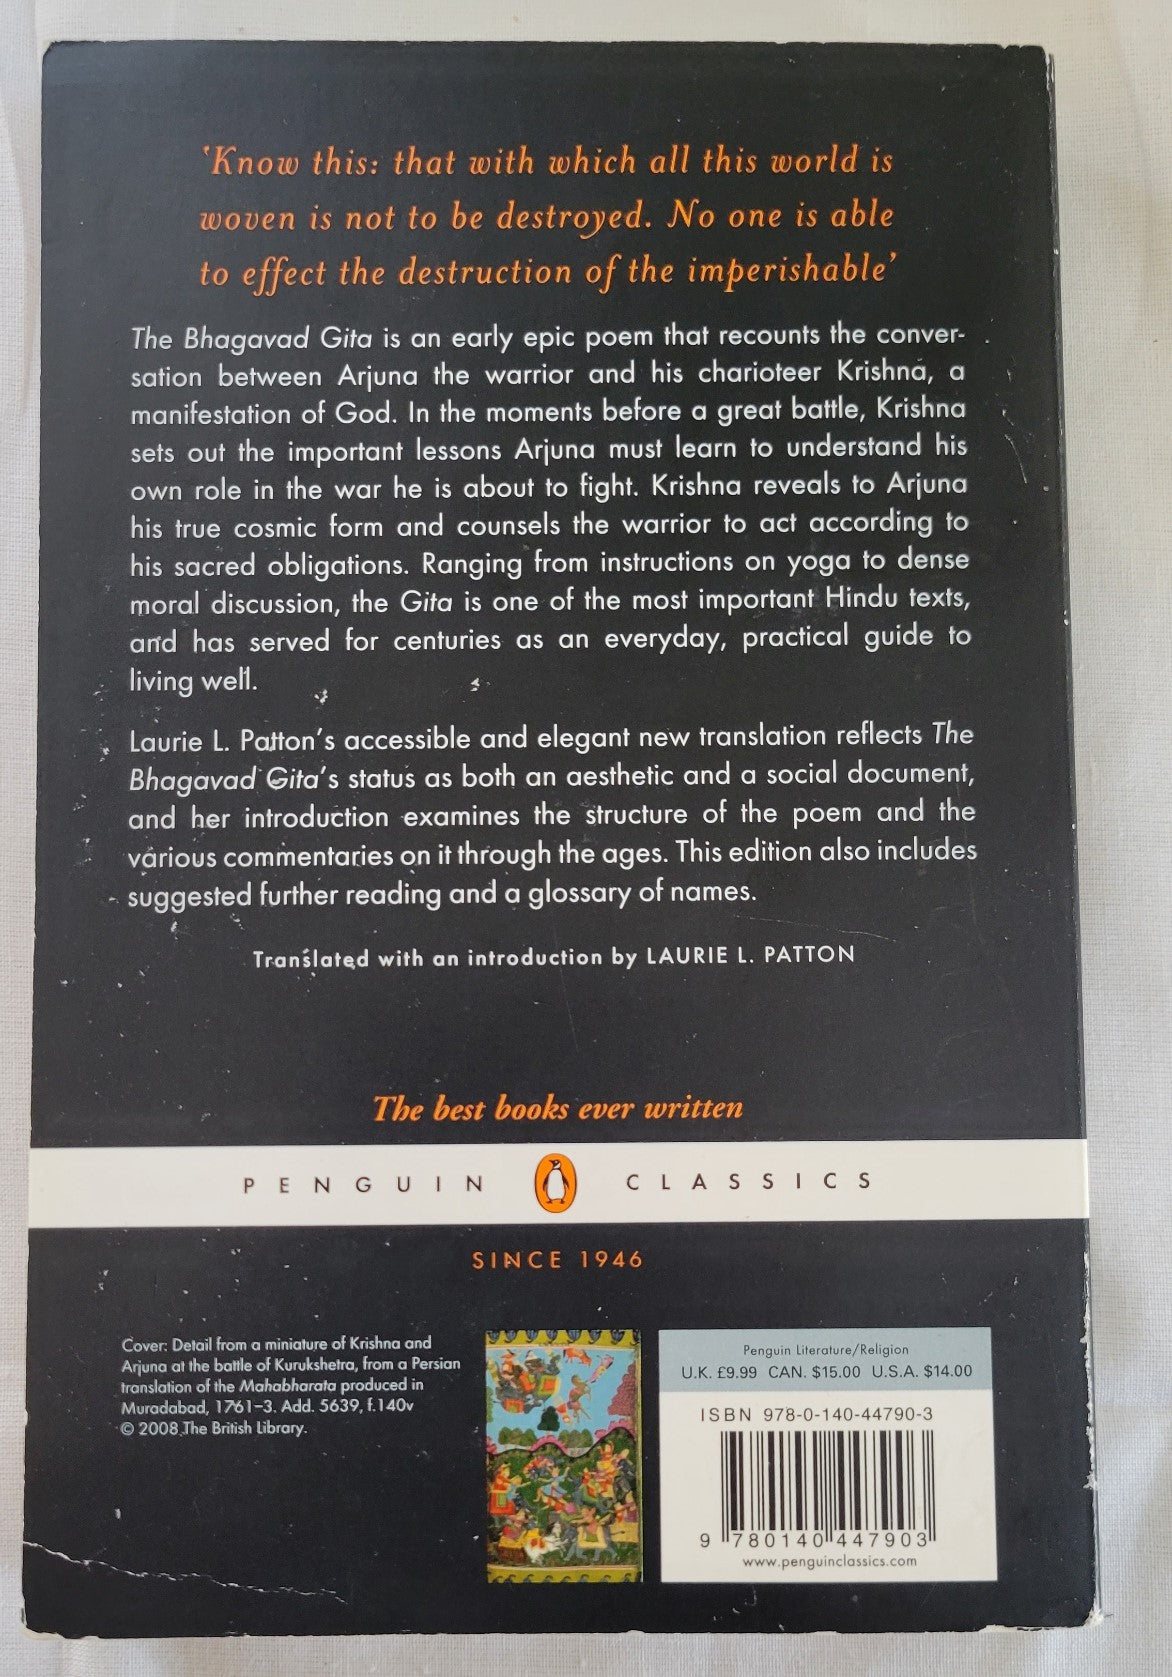 Used book for sale “The Bhagavad Gita” Hindu epic translated by Laurie L. Patton. Back cover.